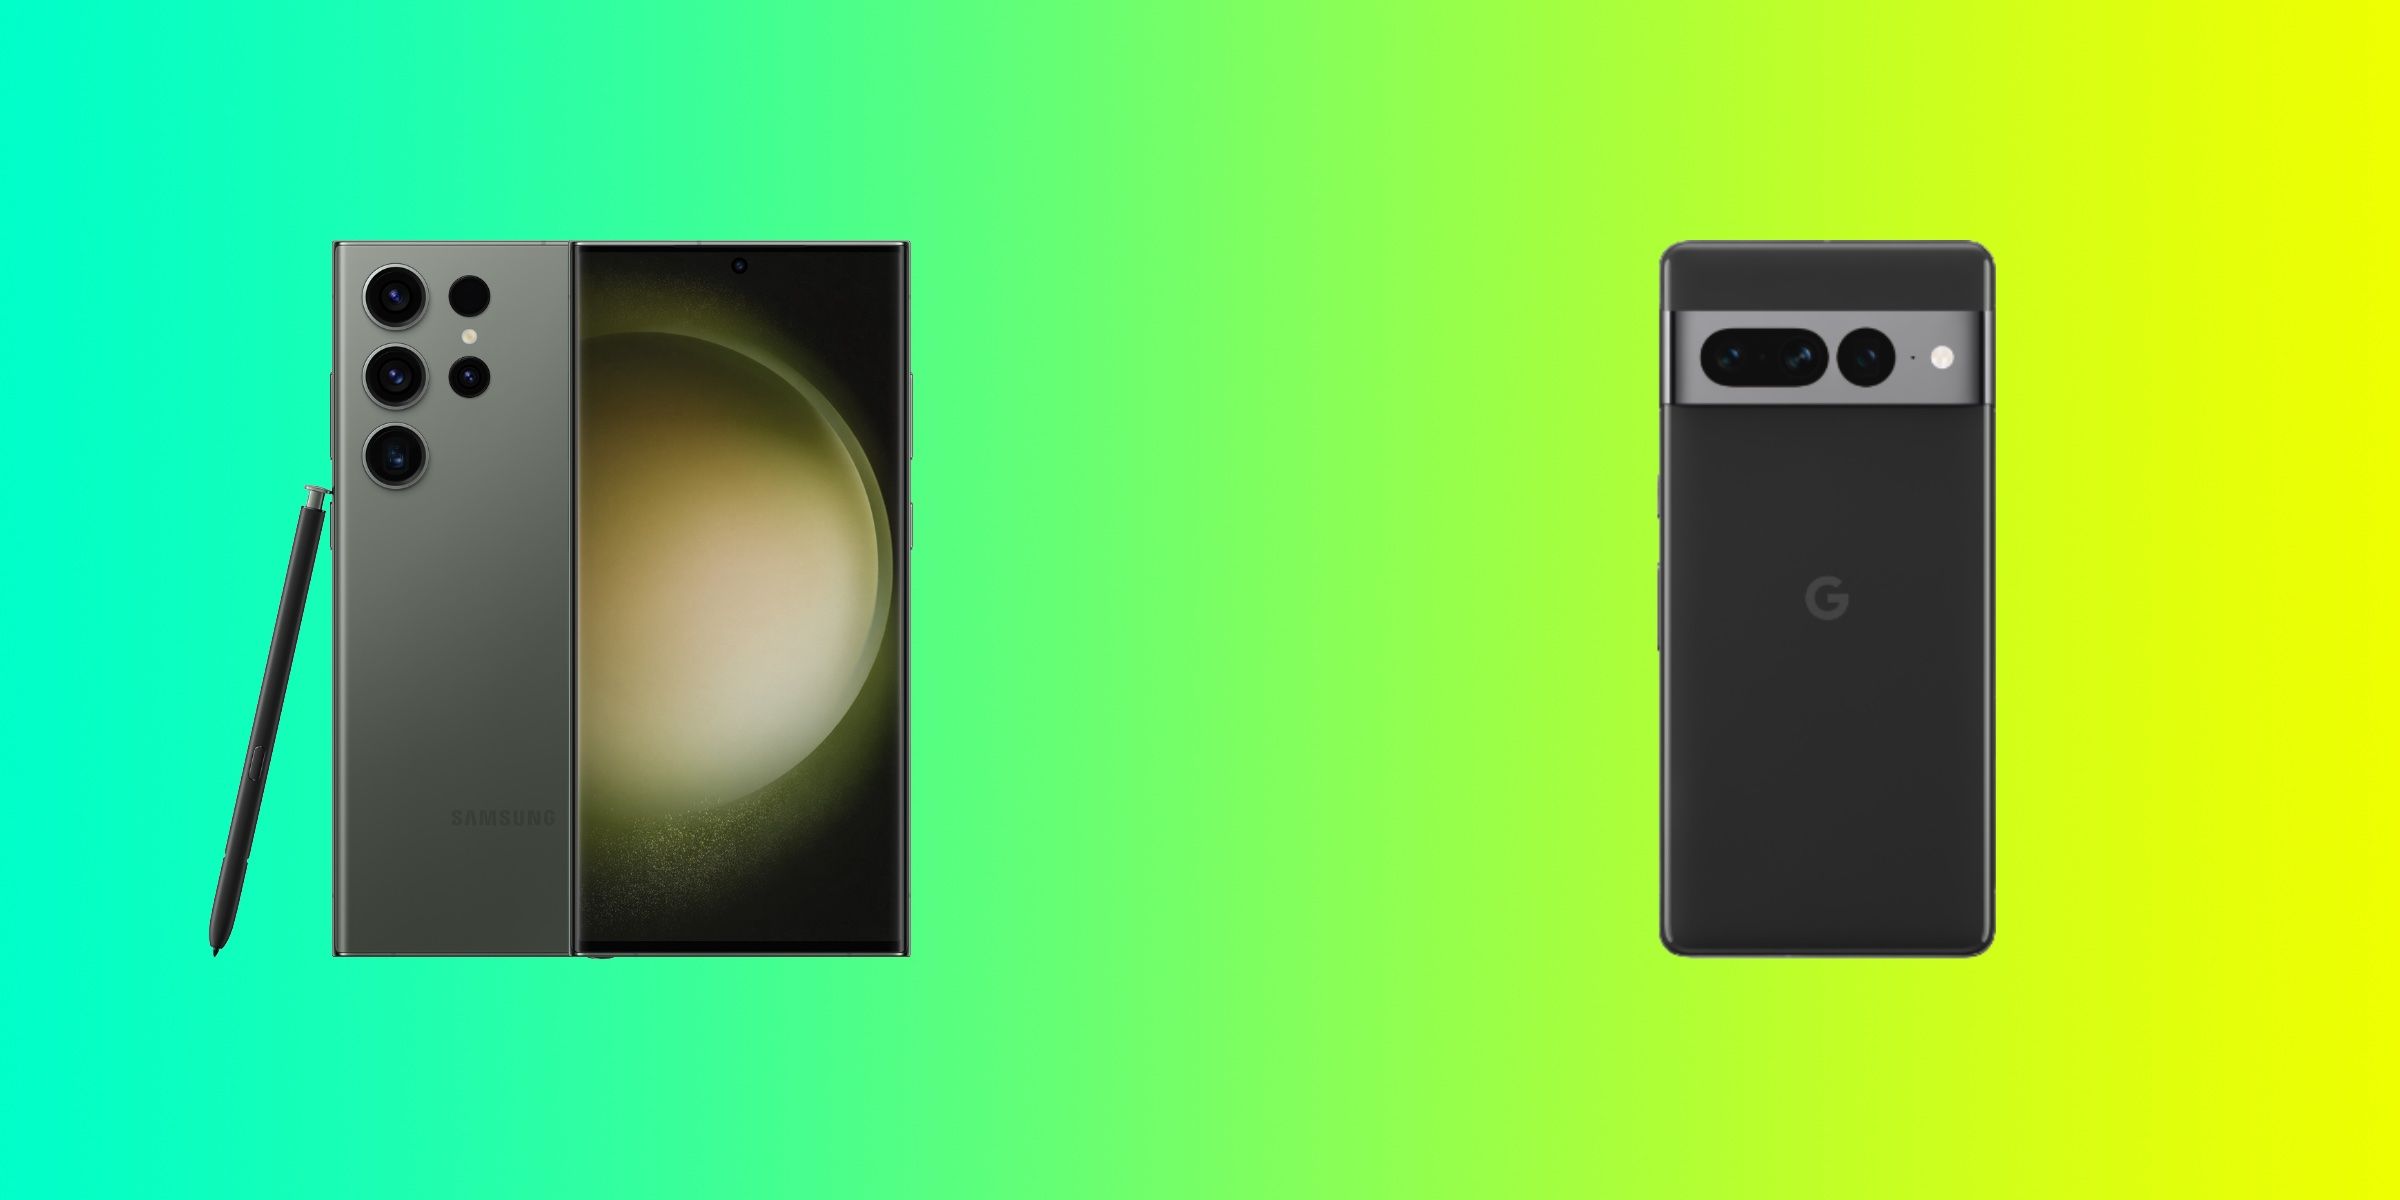 The S23 Ultra beside the Pixel 7 Pro against a green and yellow gradient background.